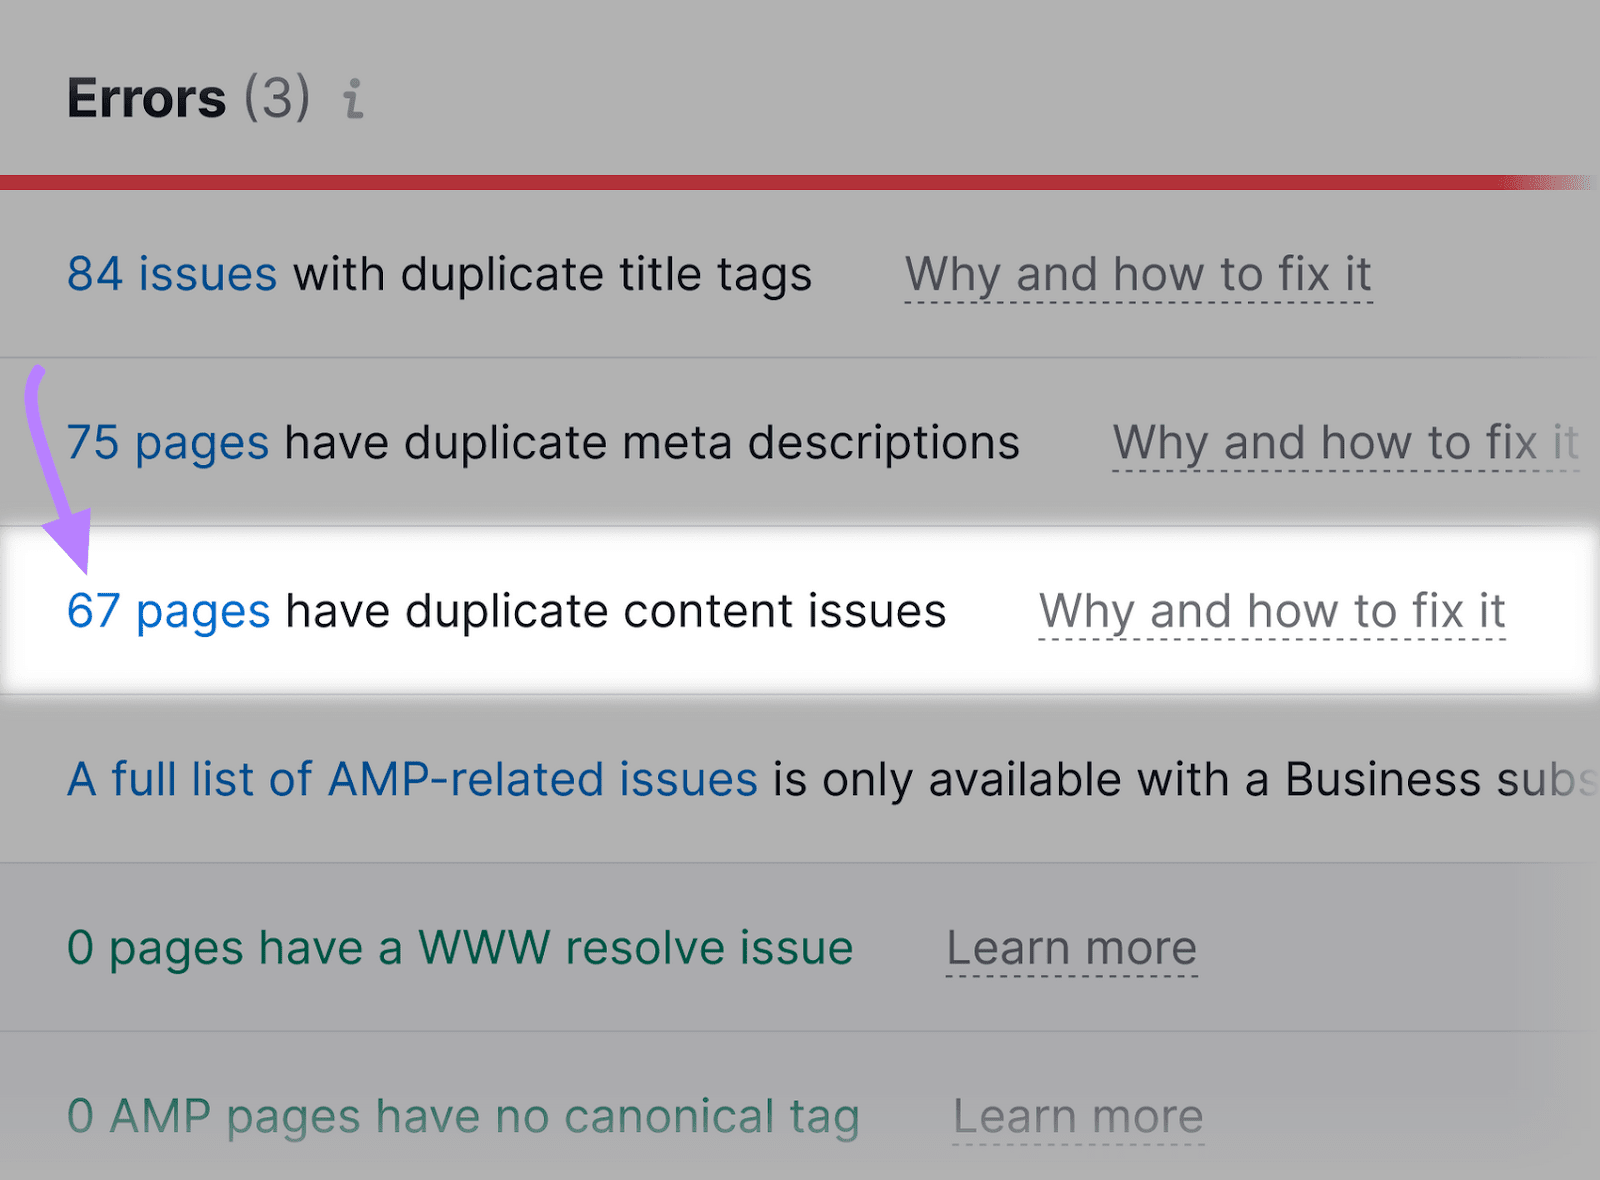 "67 pages have duplicate content issue” row highlighted